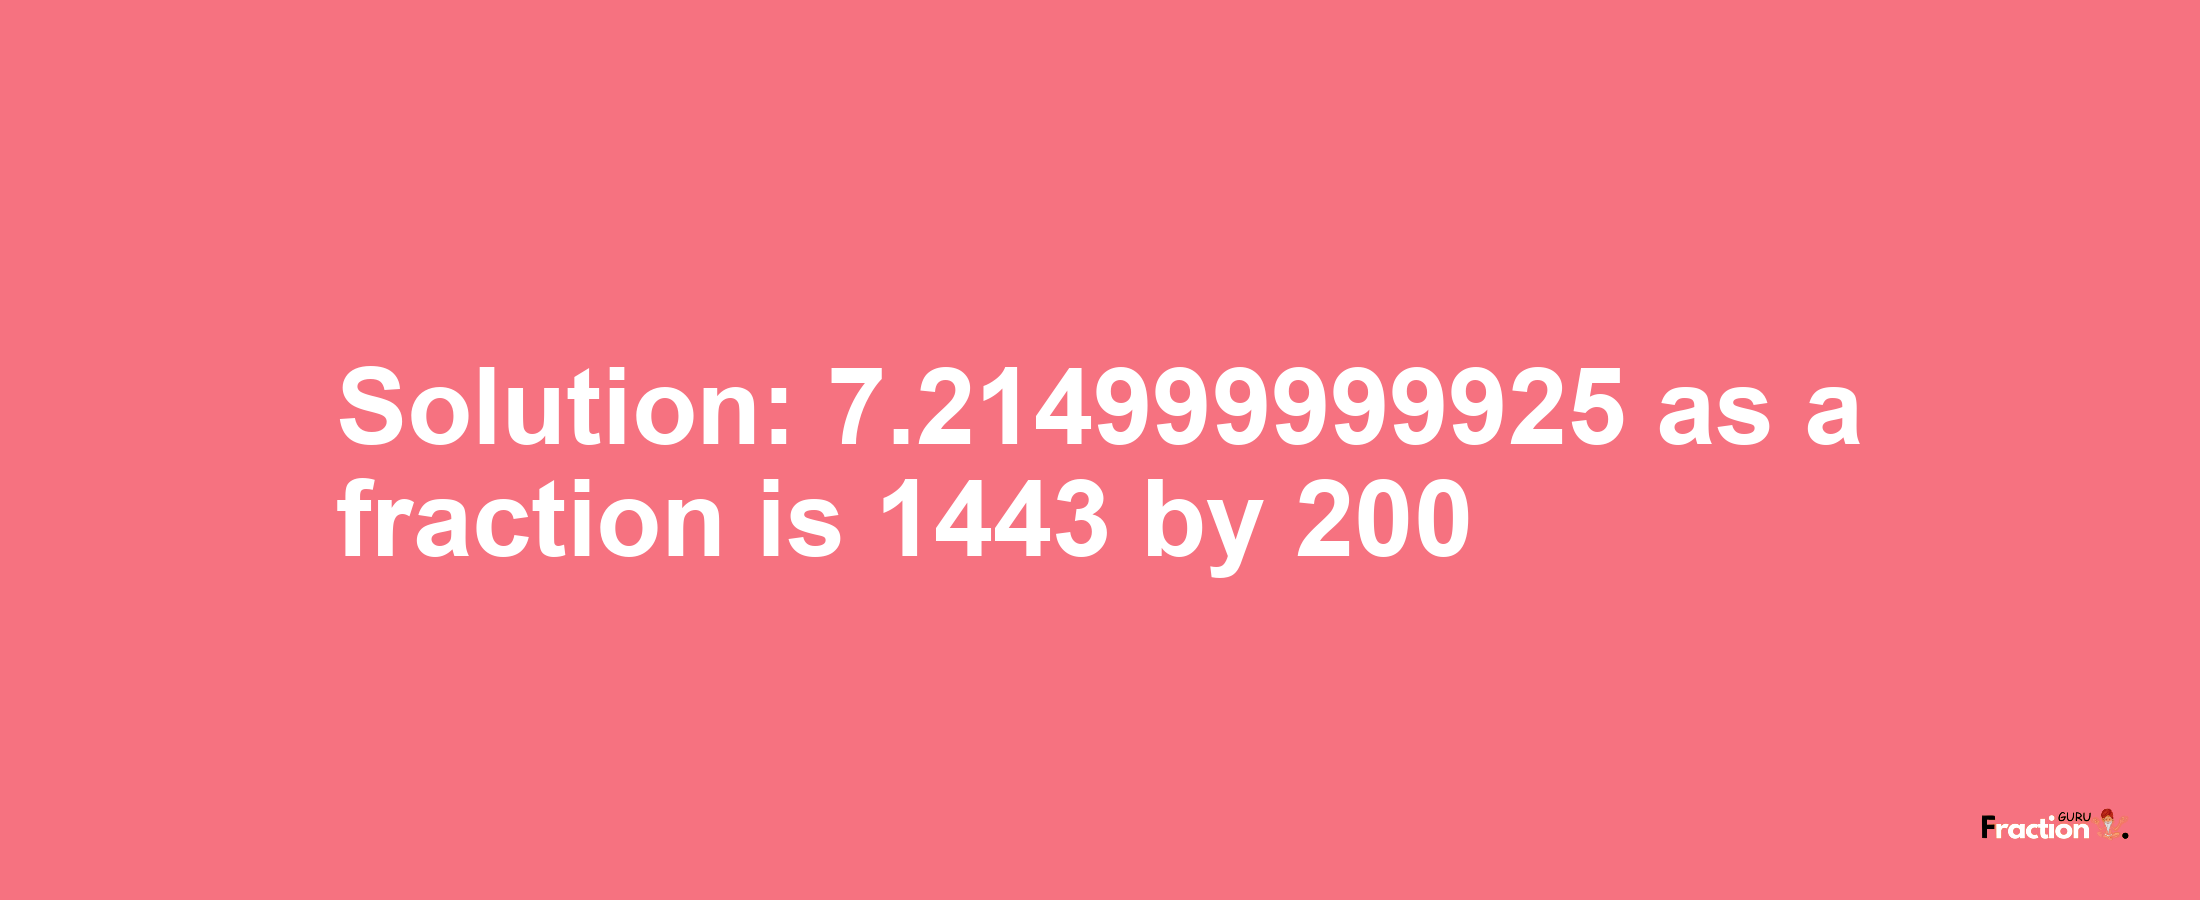 Solution:7.214999999925 as a fraction is 1443/200